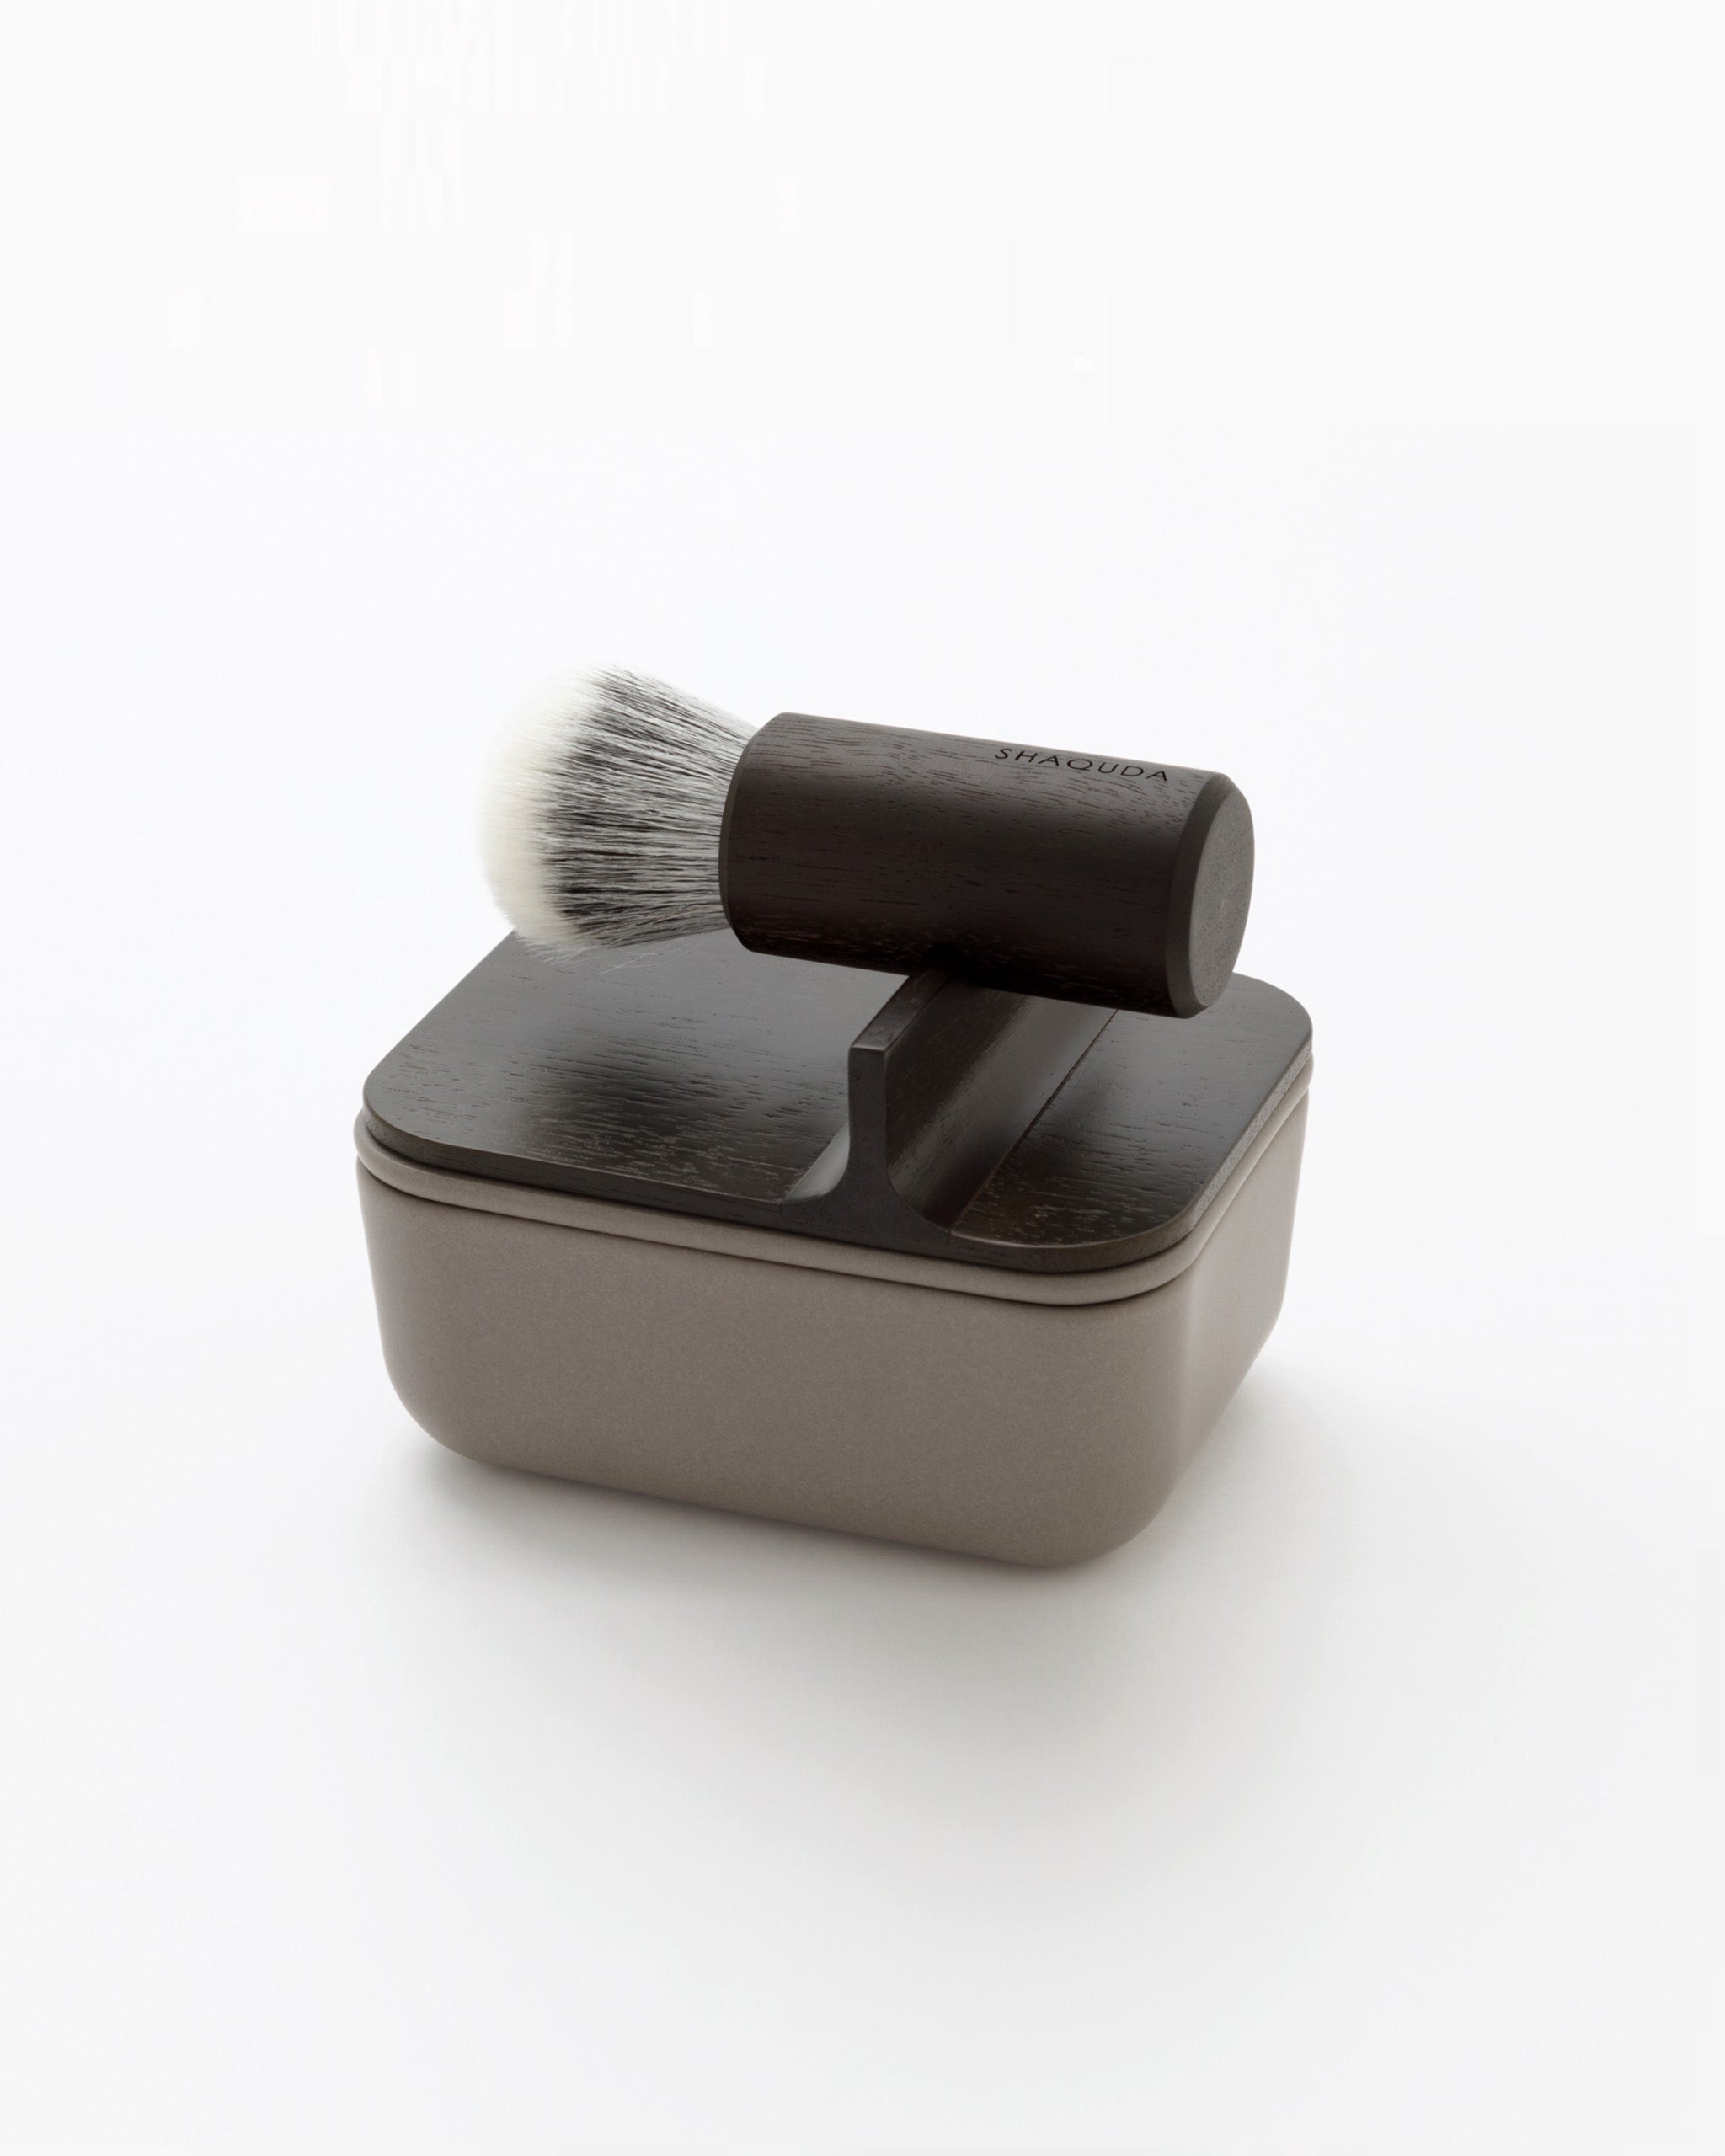 Angled image of soft Jiva face cleansing and shaving series with porcelain bowl and walnut, boar bristle, and goat hair brush by Shaquda against white-gray background.